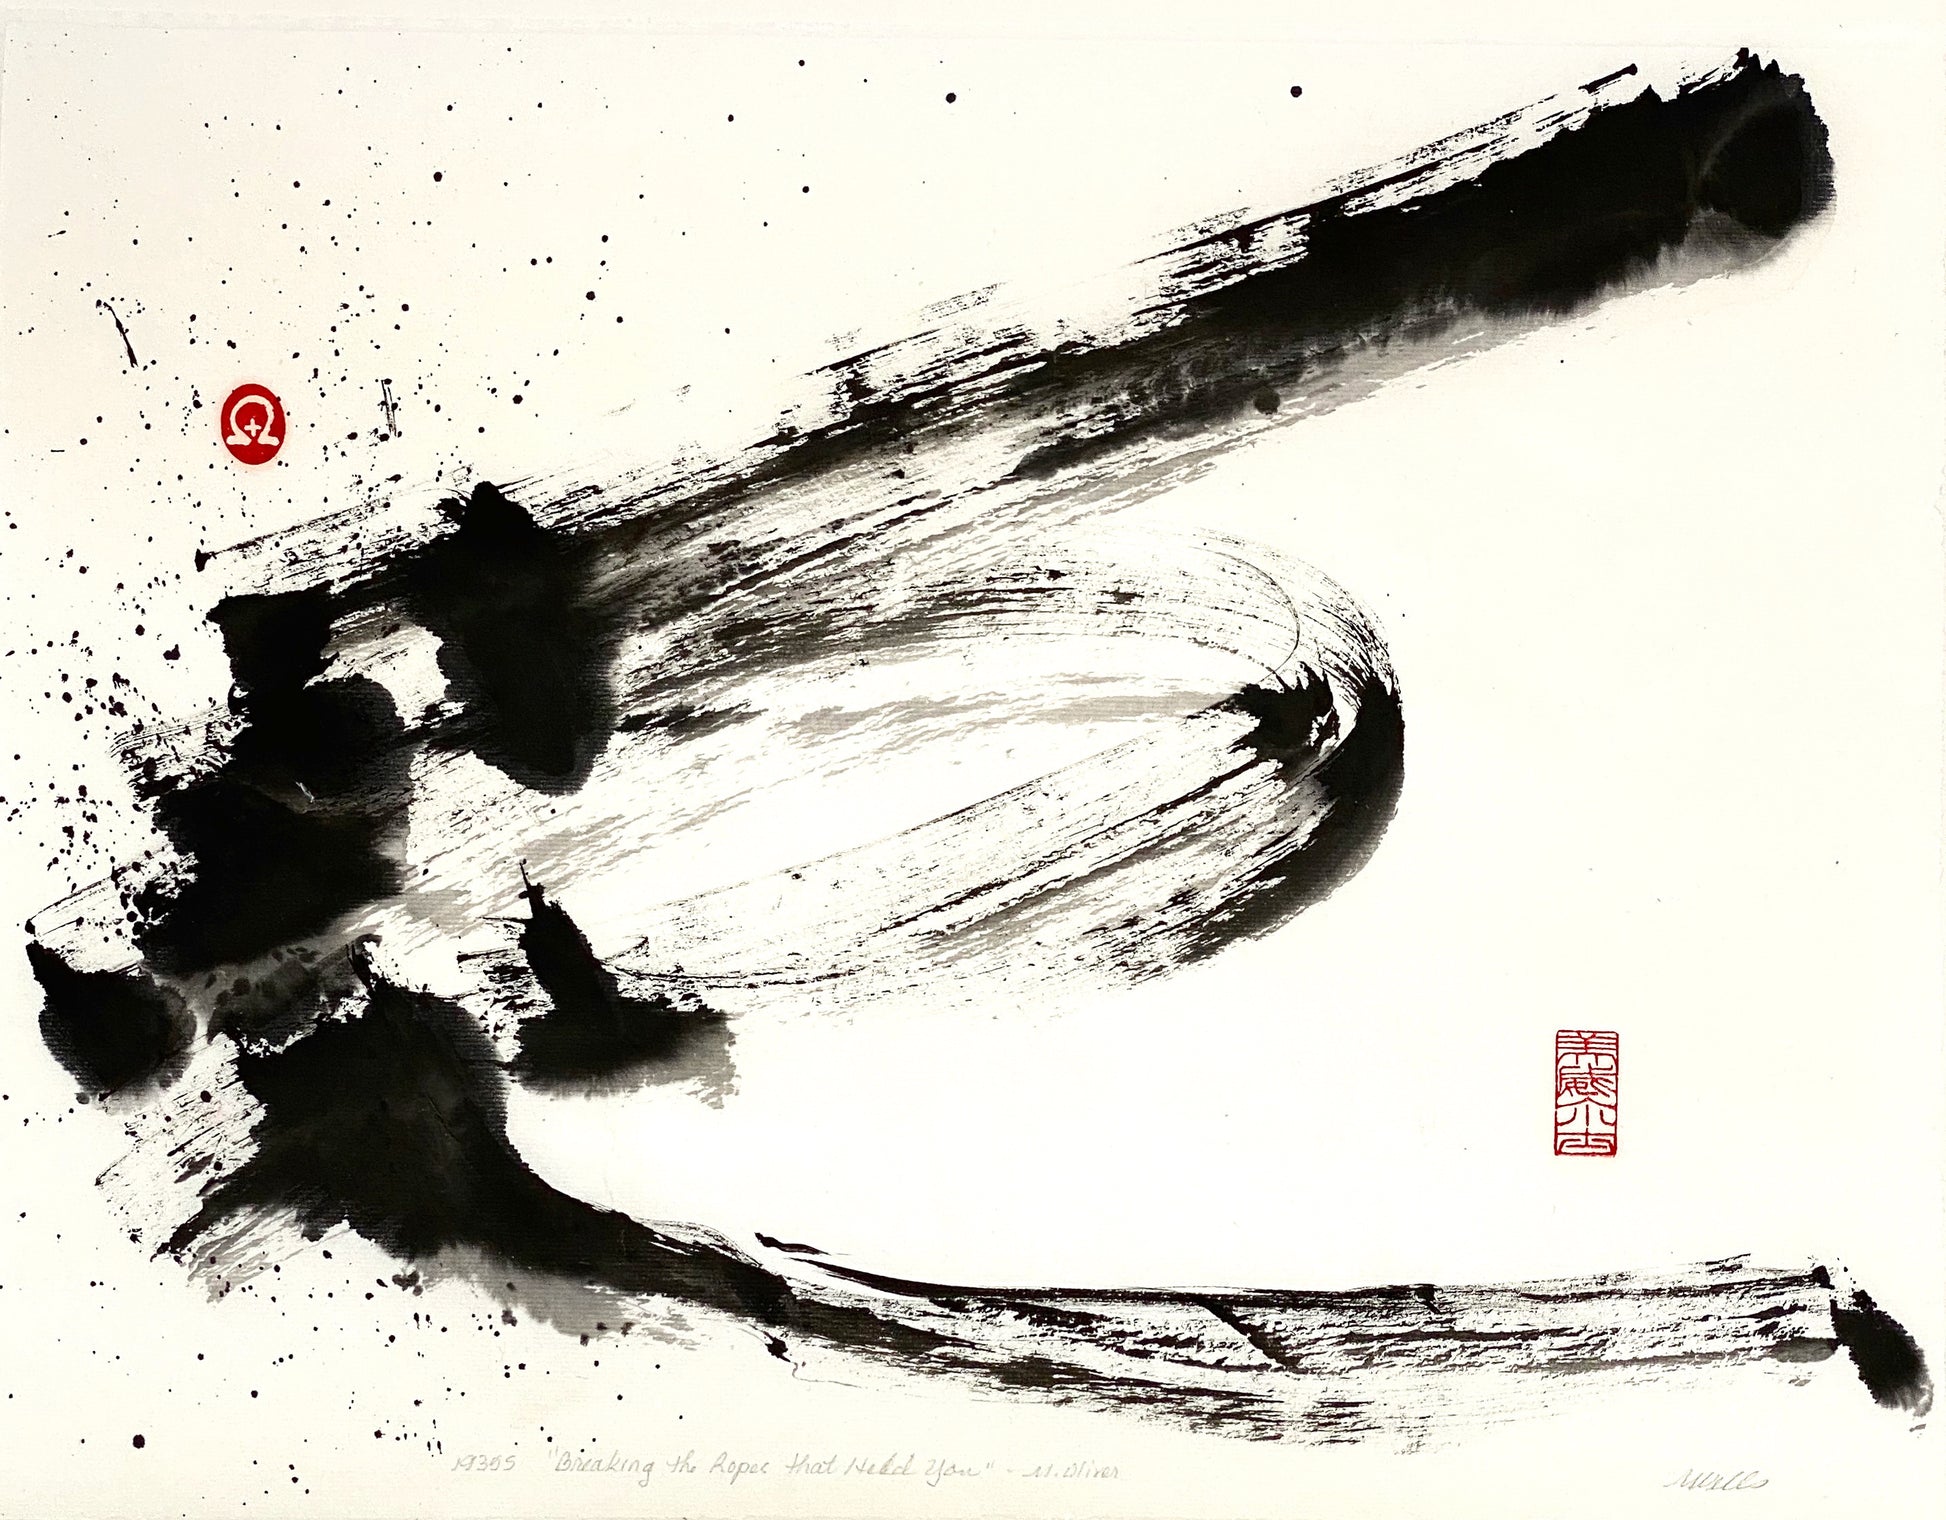 Black on white sumi e abstract painting "What is Holding You" by Marilyn Wells based on a poem by Mary Oliver 